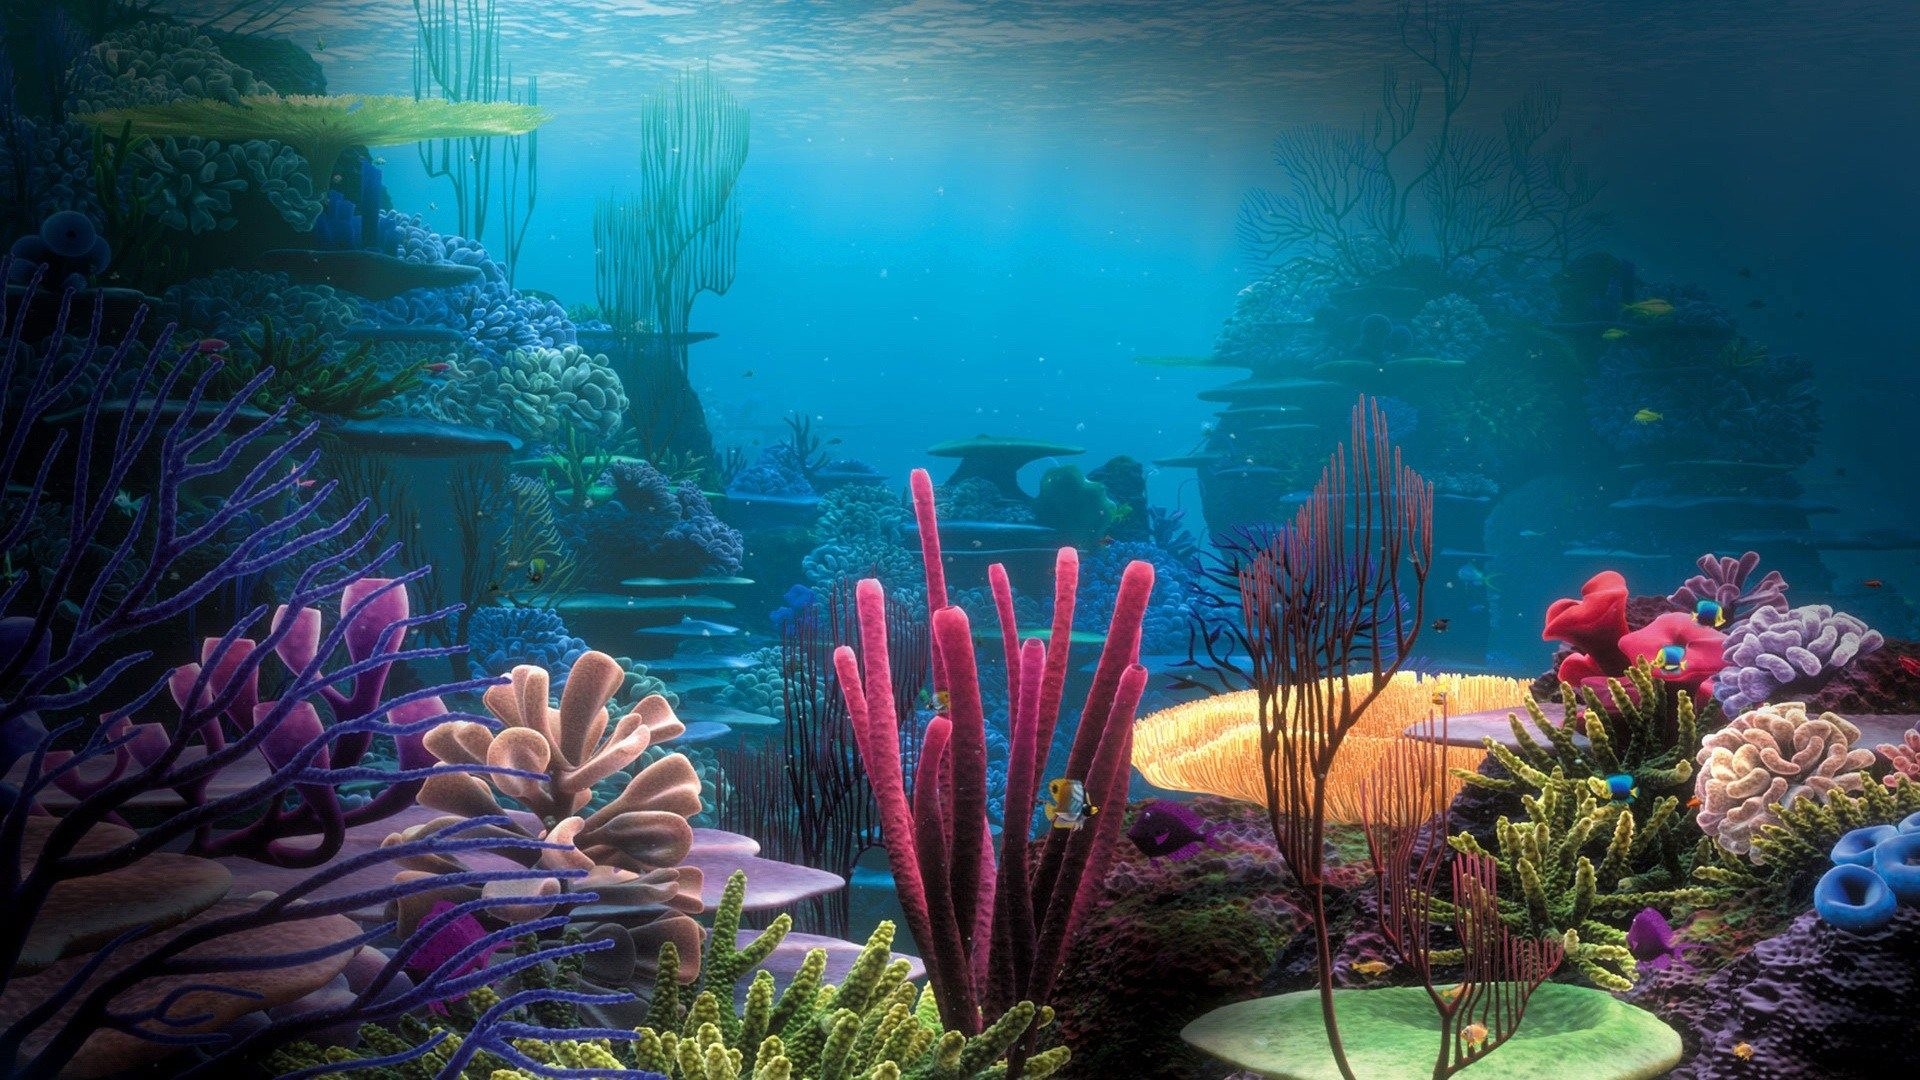 General 1920x1080 water underwater sea coral colorful Linux